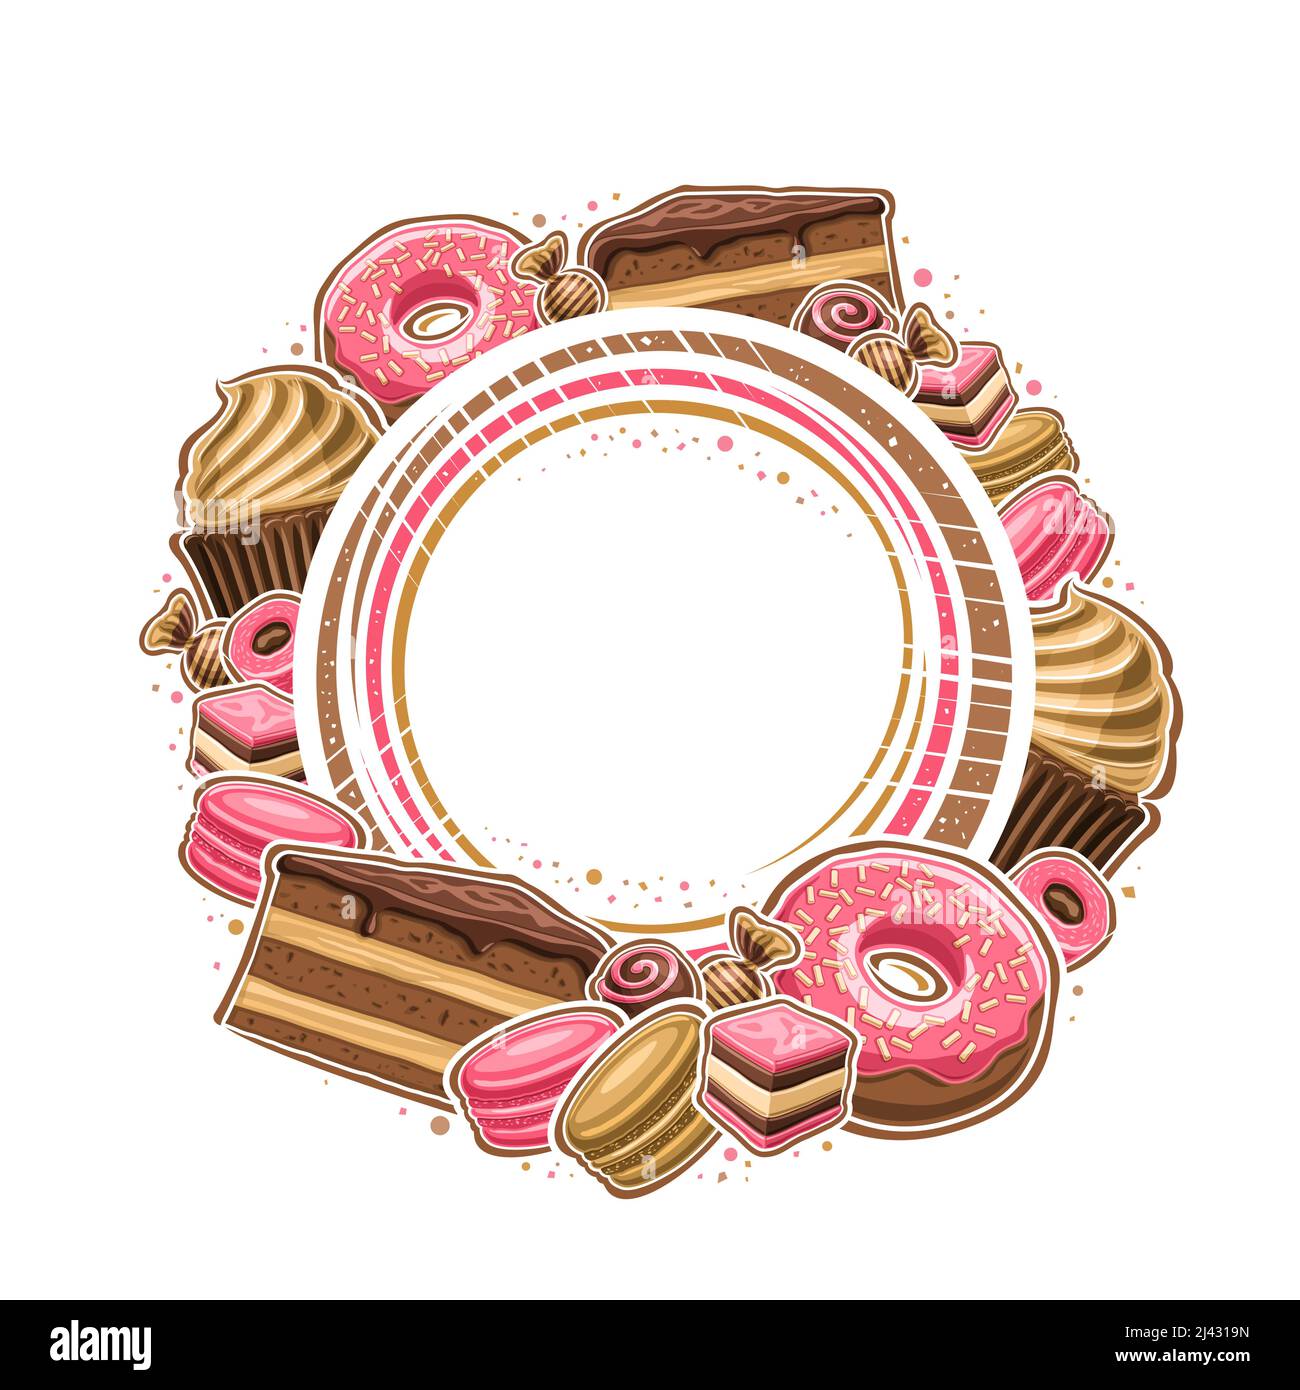 Vector frame for Patisserie with copy space, decorative sign board with illustration of various desserts, glaze cake slice, rose color frosting donut, Stock Vector